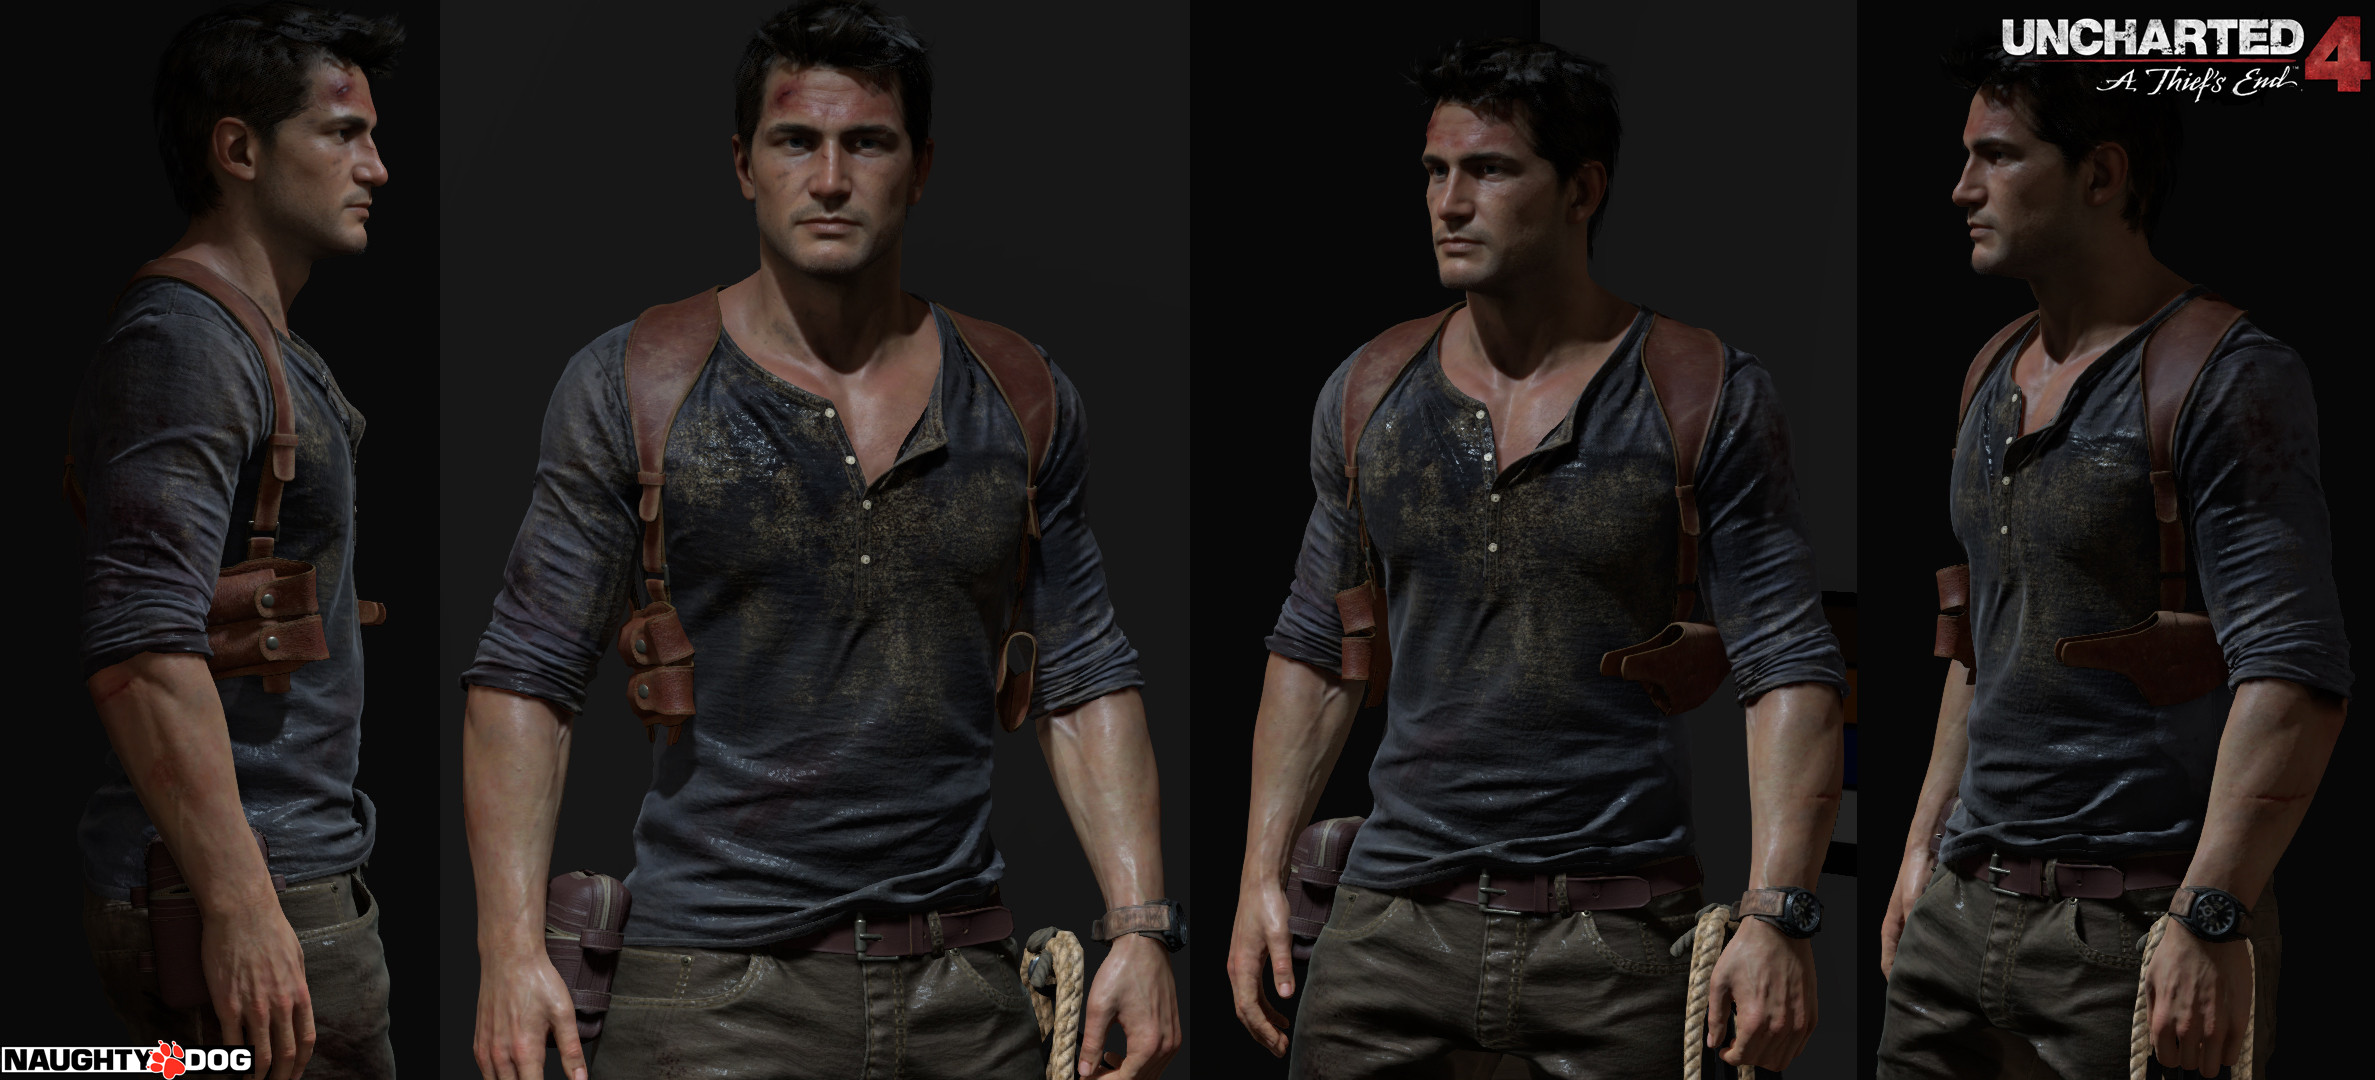 Nathan Drake - Finished Projects - Blender Artists Community